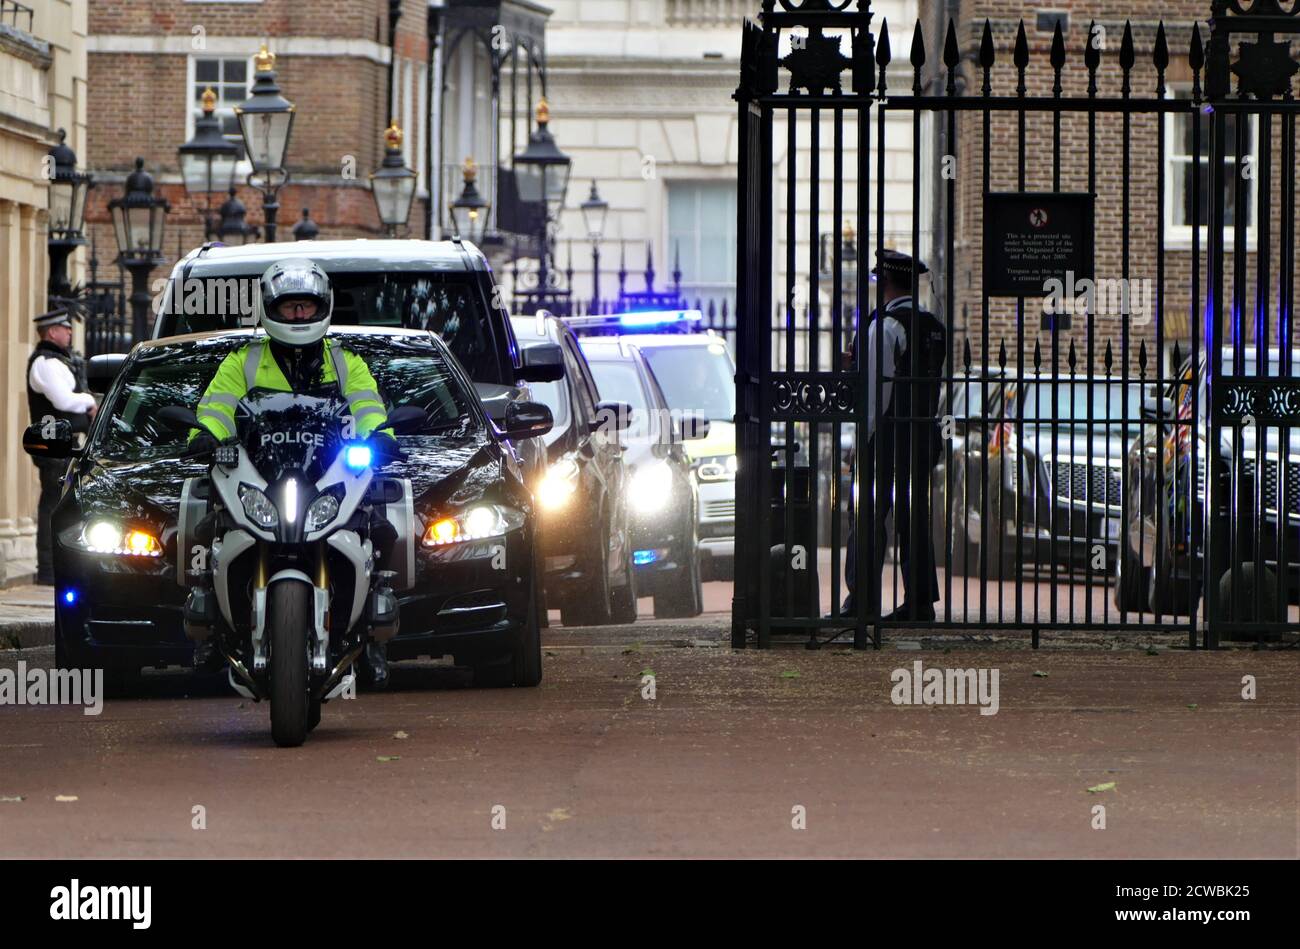 Photograph of the armed police security at St James' Palace for a departing minister after meeting US President Donald Trump, during his visit to London. June 2019 Stock Photo